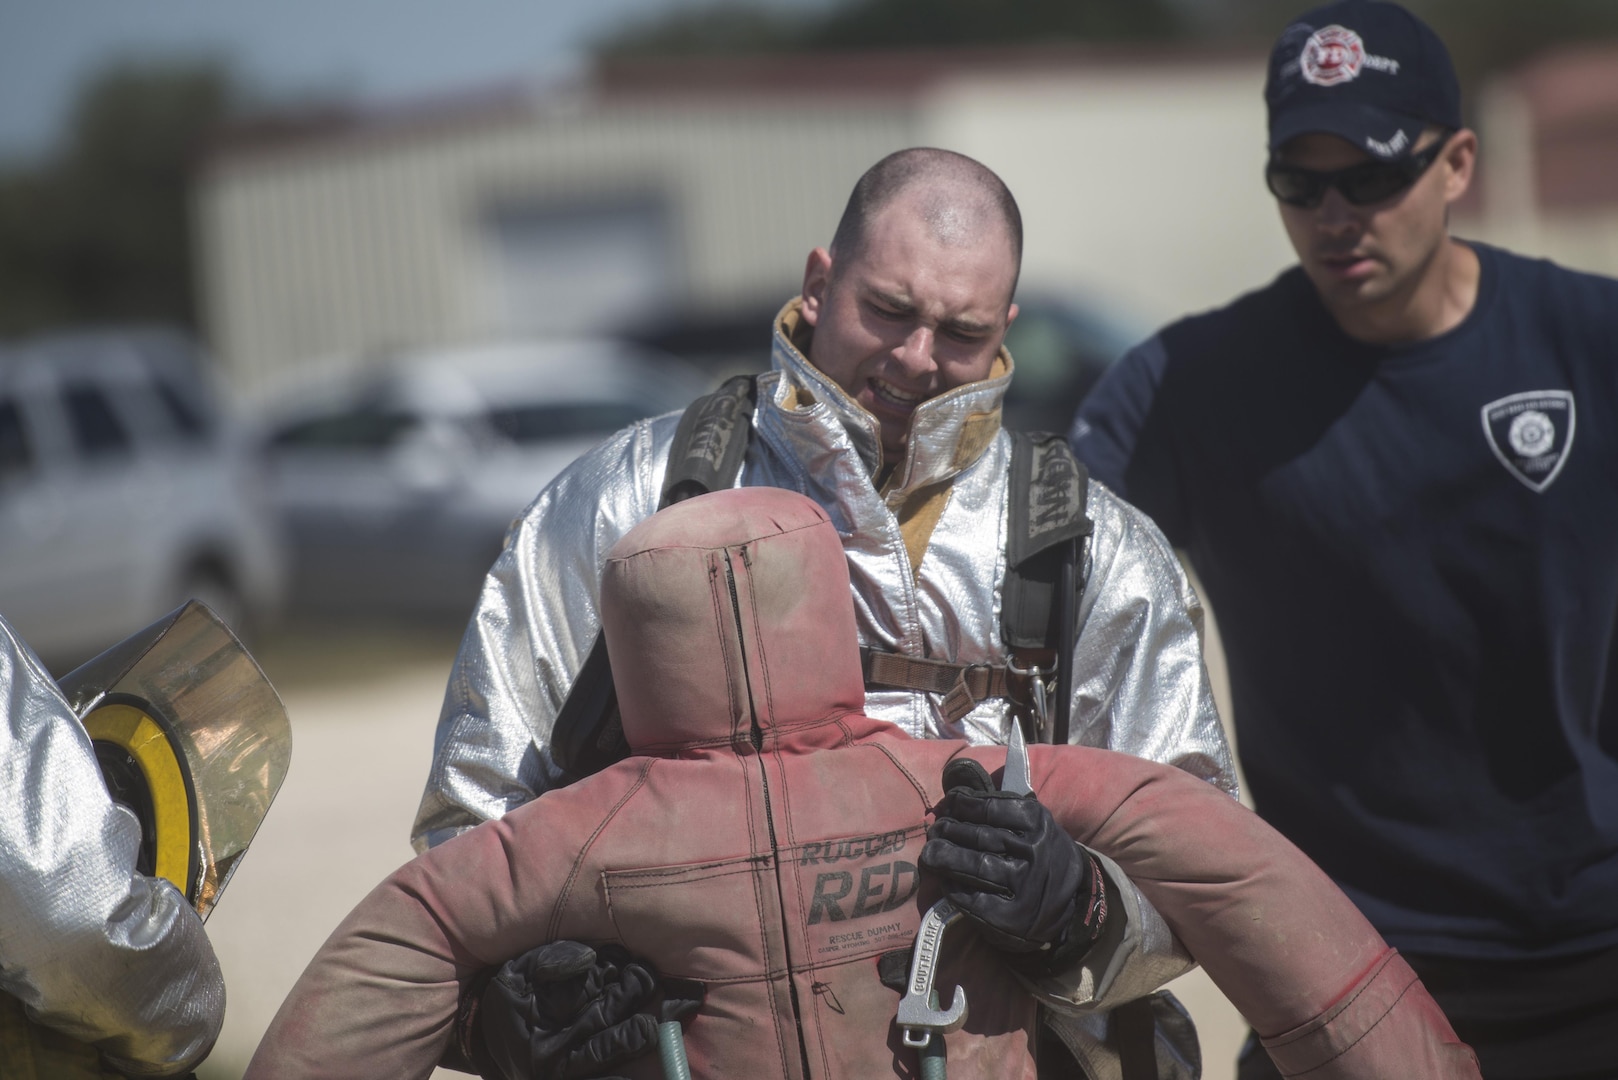 Airman 1st Class John Connor, 902nd Security Forces Squadron armorer, drags a 185-pound dummy during the firefighter combat challenge event of the JBSA Battle of the Badges Sept. 12, 2015, at JBSA-Randolph. This year’s Battle of the Badges was comprised of three main events for time: a tactical shooting challenge, firefighter combat challenge and fire truck pull. The firefighter combat challenge tested members of both parties with an obstacle course that included carrying gear up three flights of stairs, hoisting a bundle of hose from the ground with a rope, dragging a weighted dummy and hitting a target with a charged fire hose.